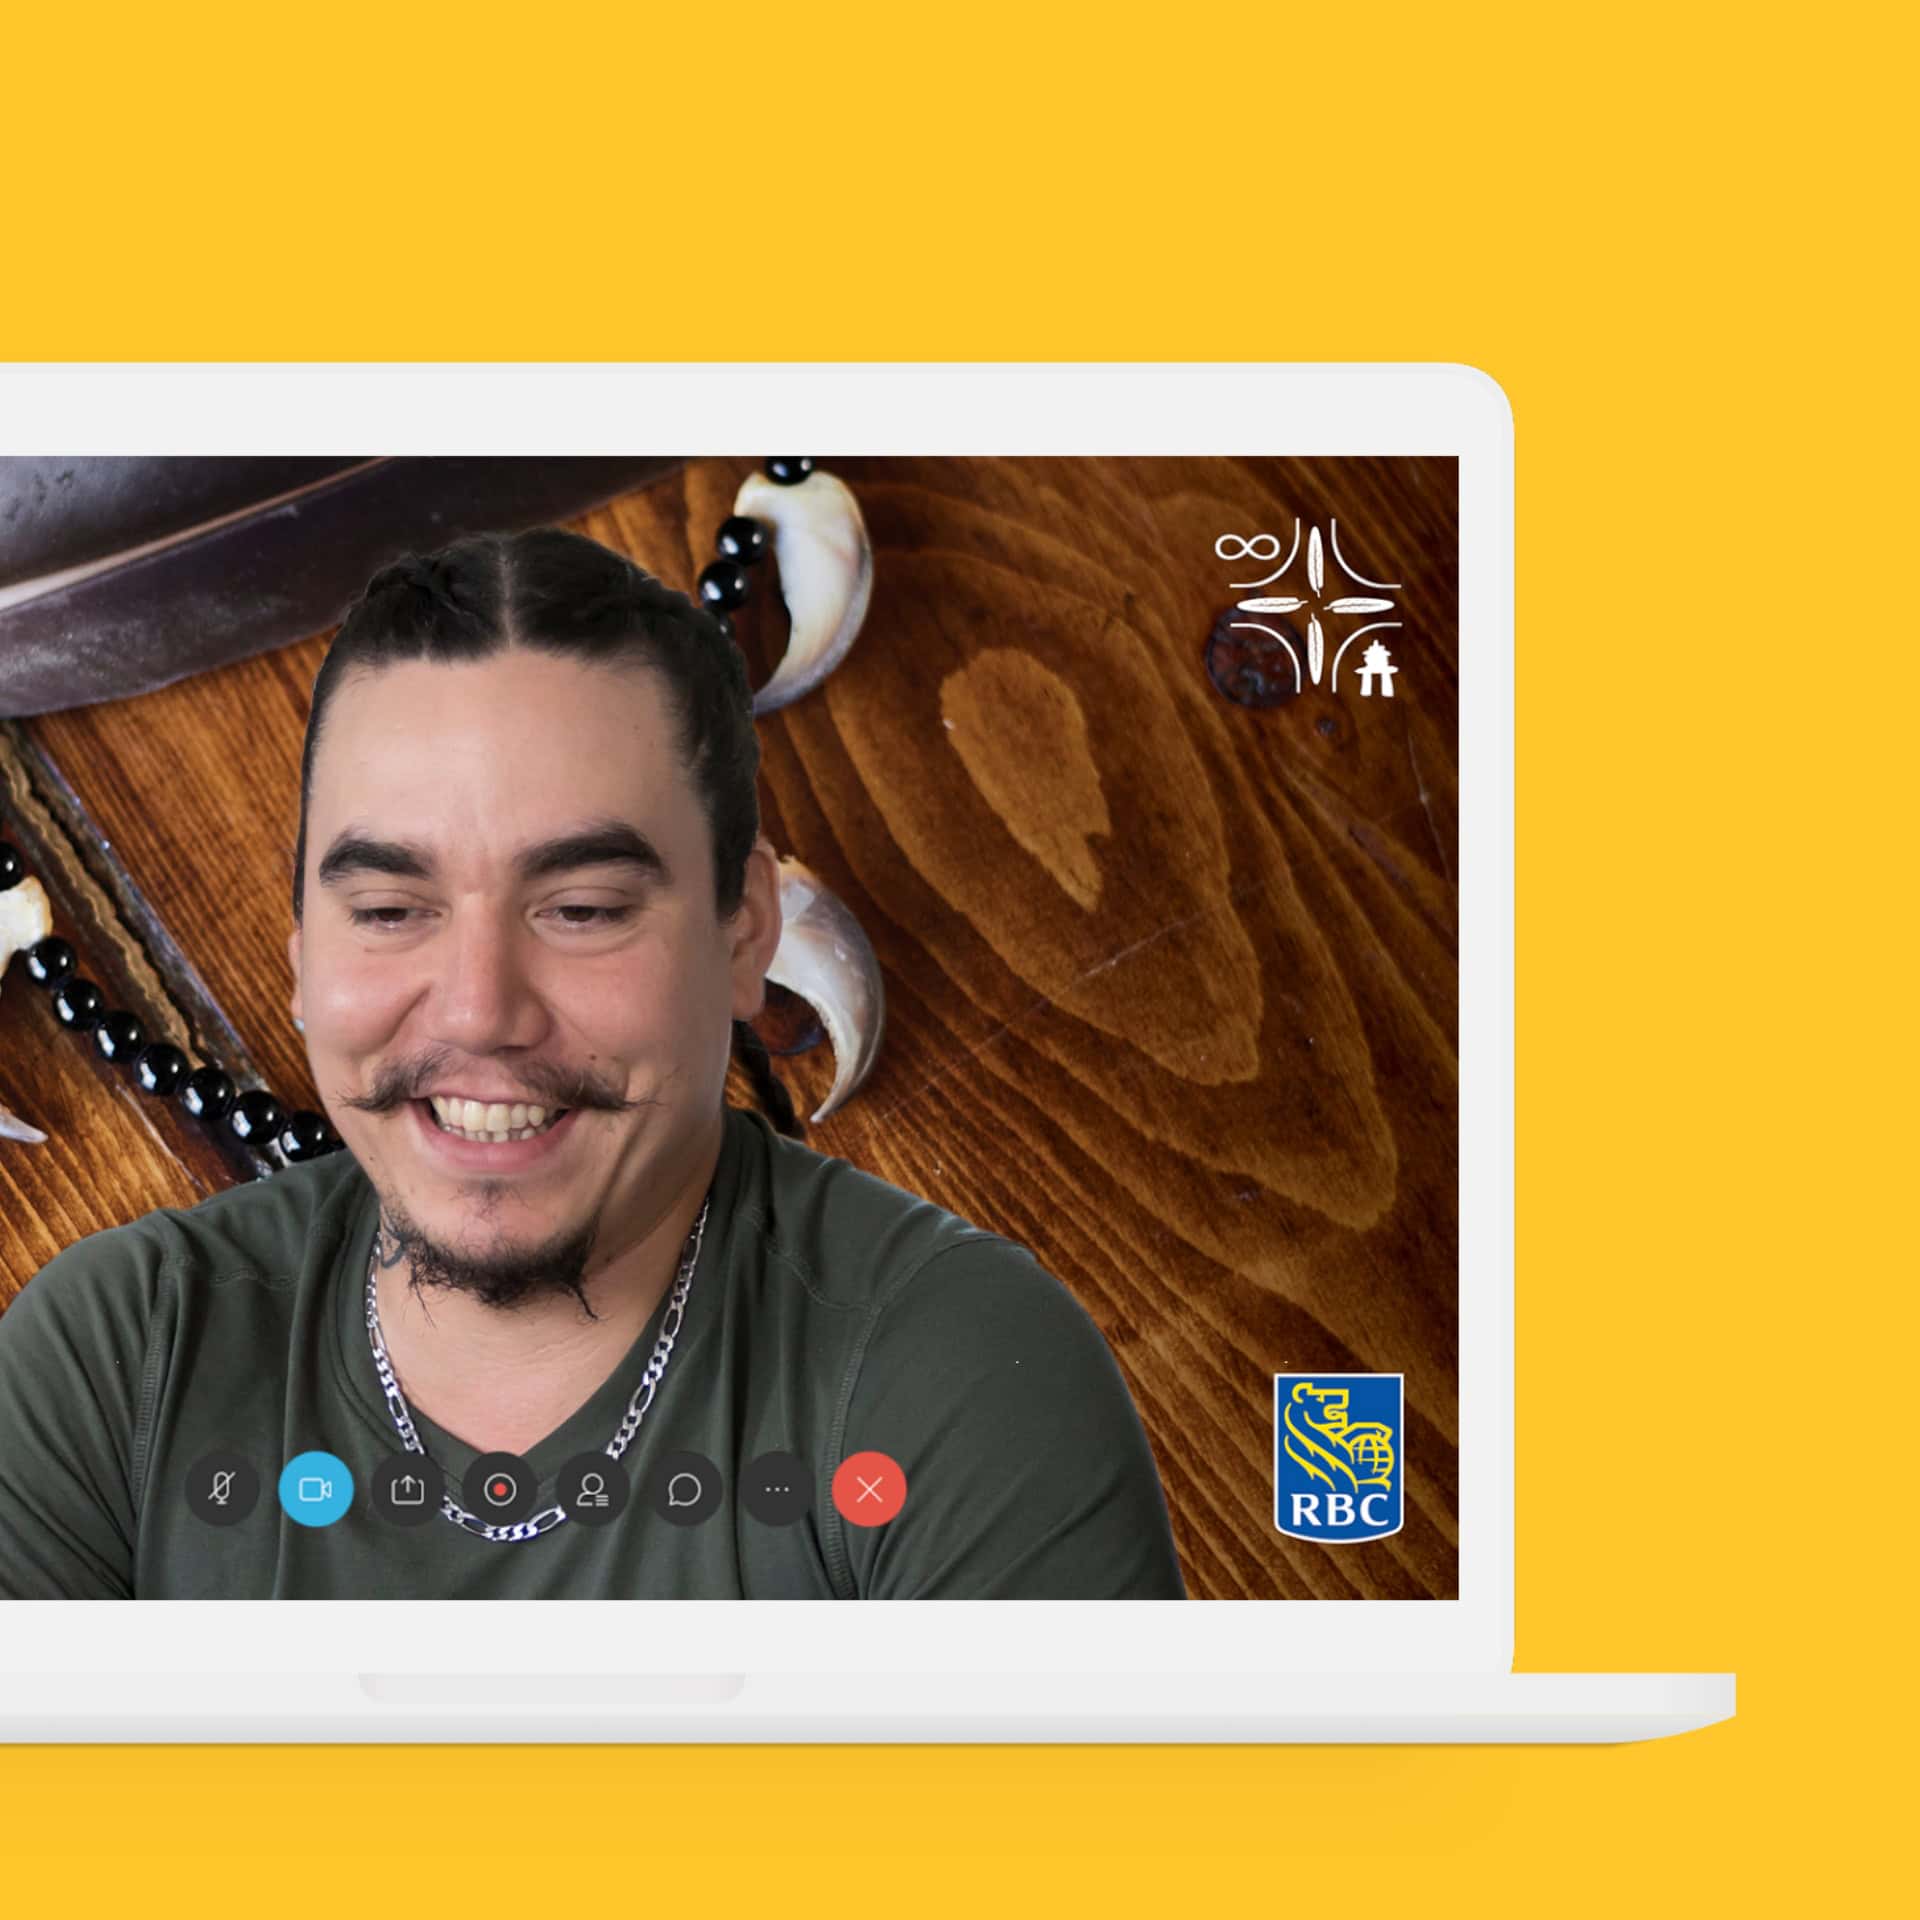 A laptop faces the viewer against a yellow background. The laptop screen shows an Indigenous man smiling during a video call, with the RBC logos against the background on the laptop screen.